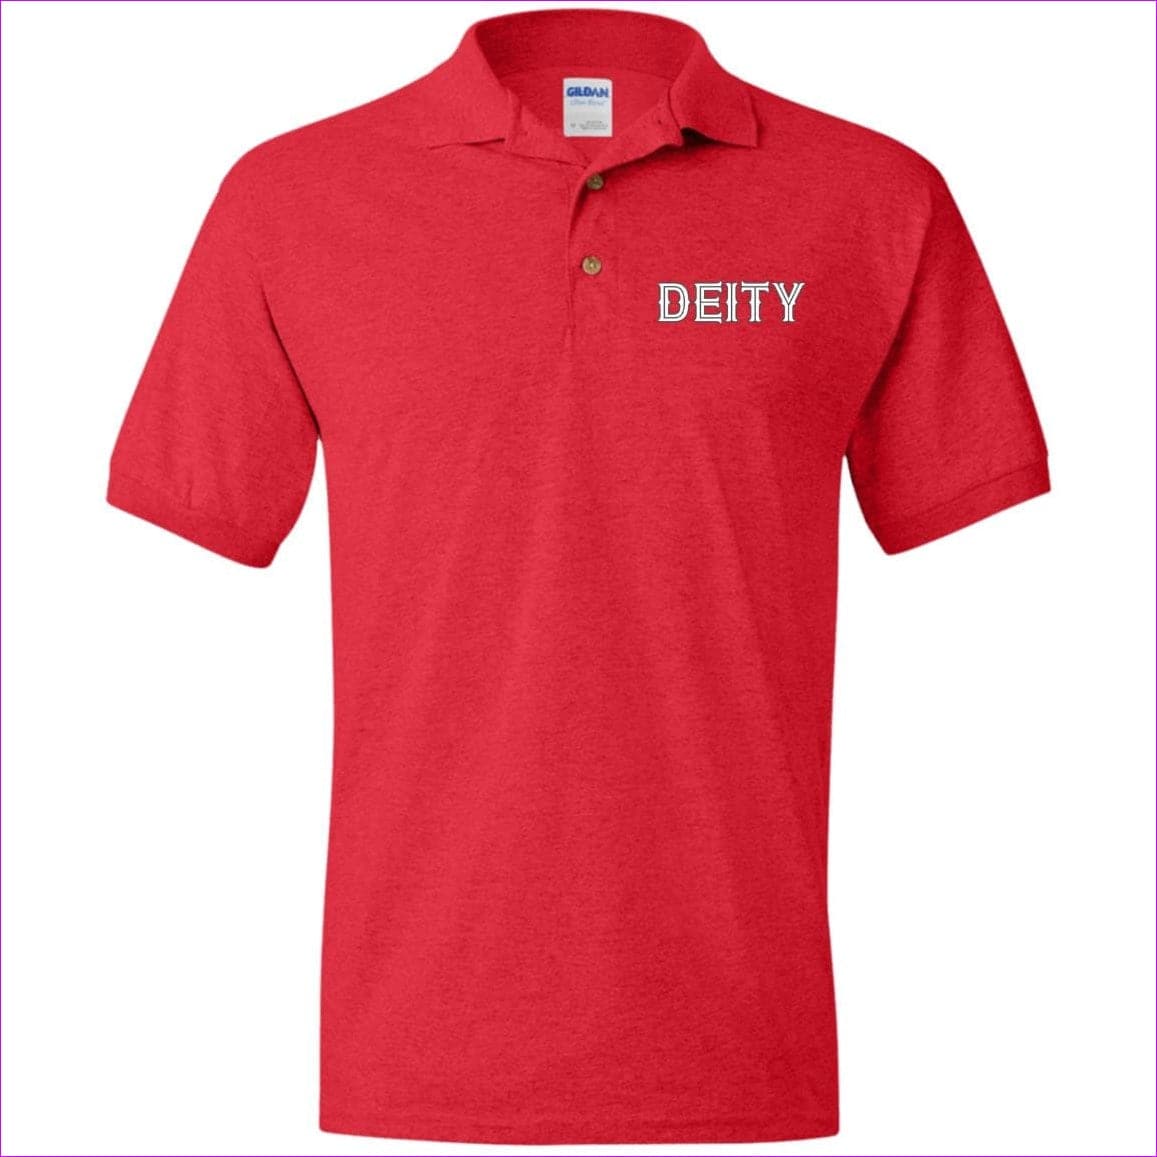 Red - Deity Men's Jersey Polo Shirt - Mens Polo Shirts at TFC&H Co.